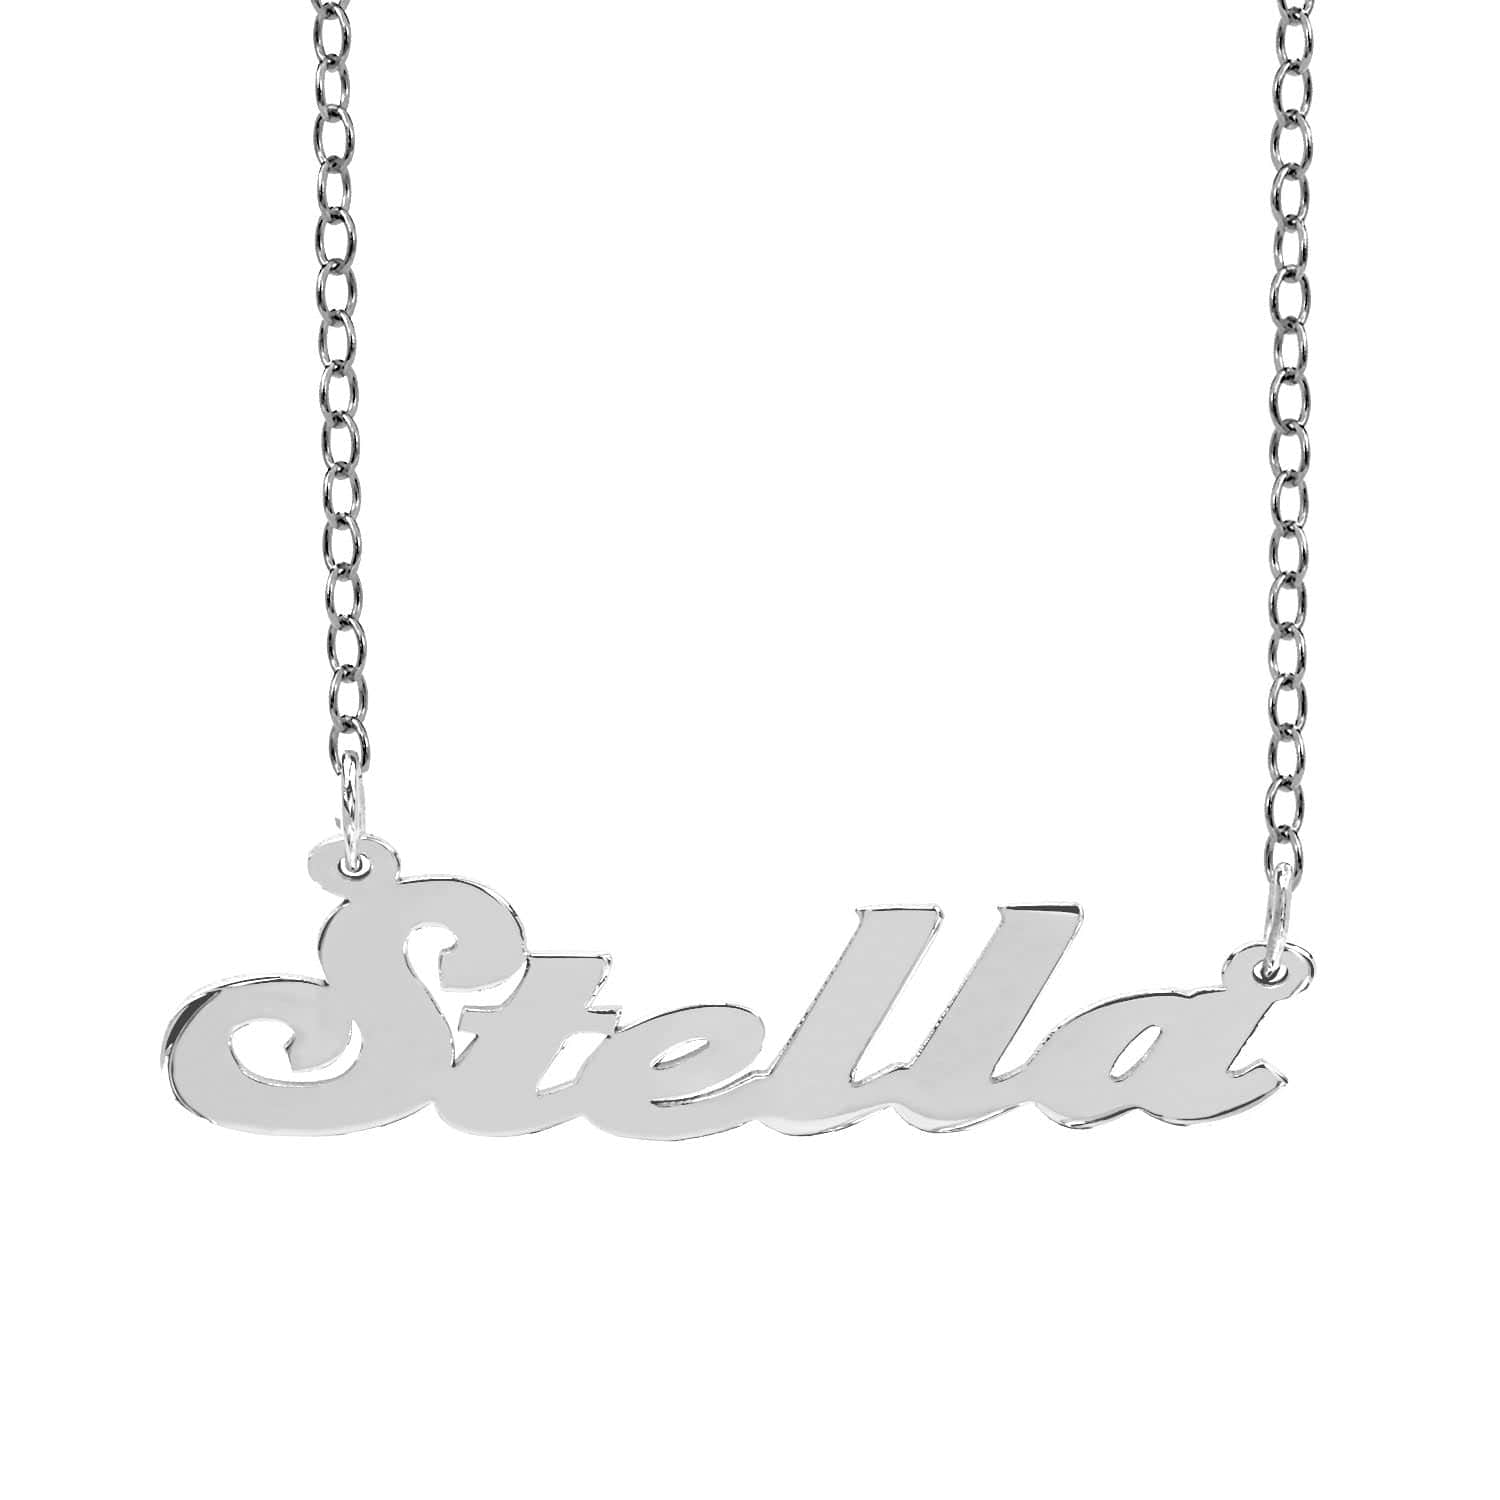 The Stella Name Necklace